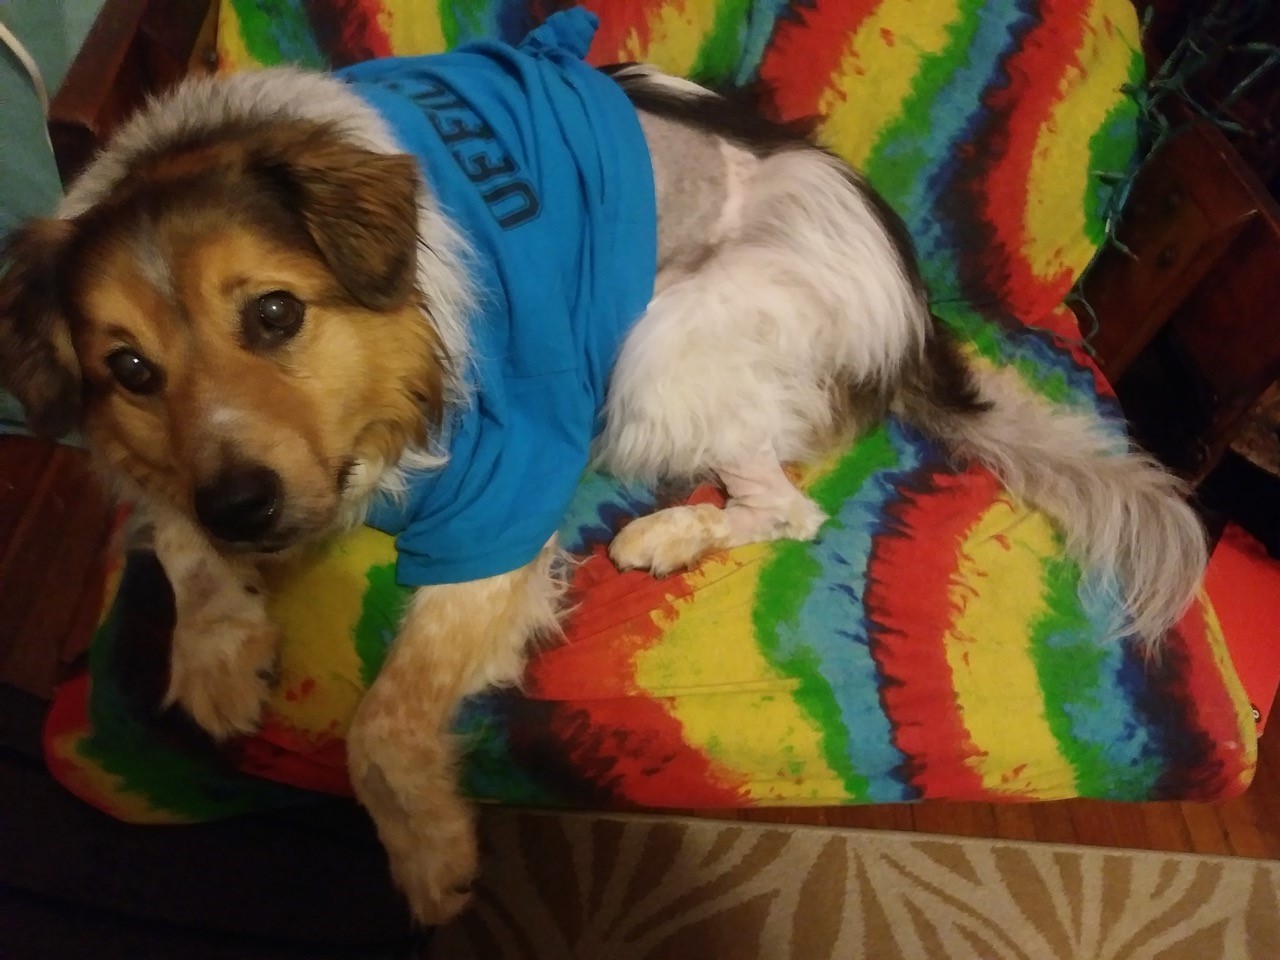 A dog wearing a t-shirt on a couch